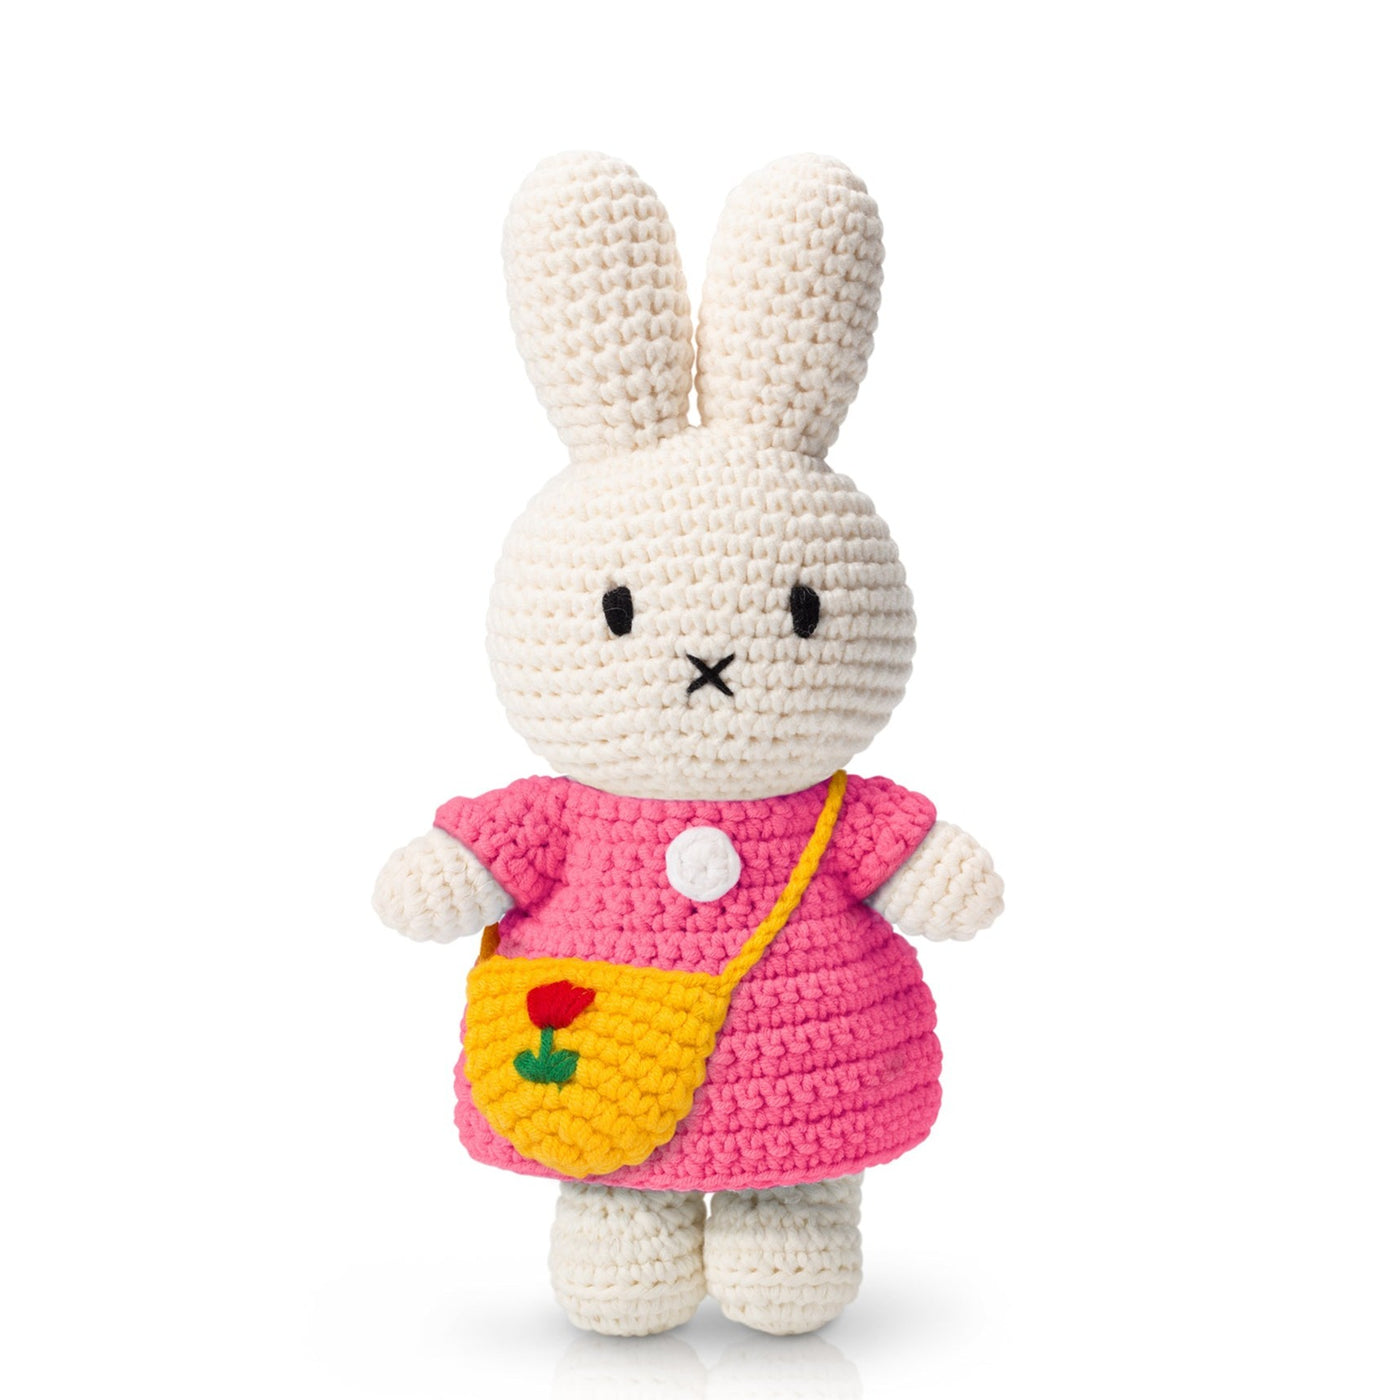 Crocheted Miffy with Pink Dress Tulip Bag